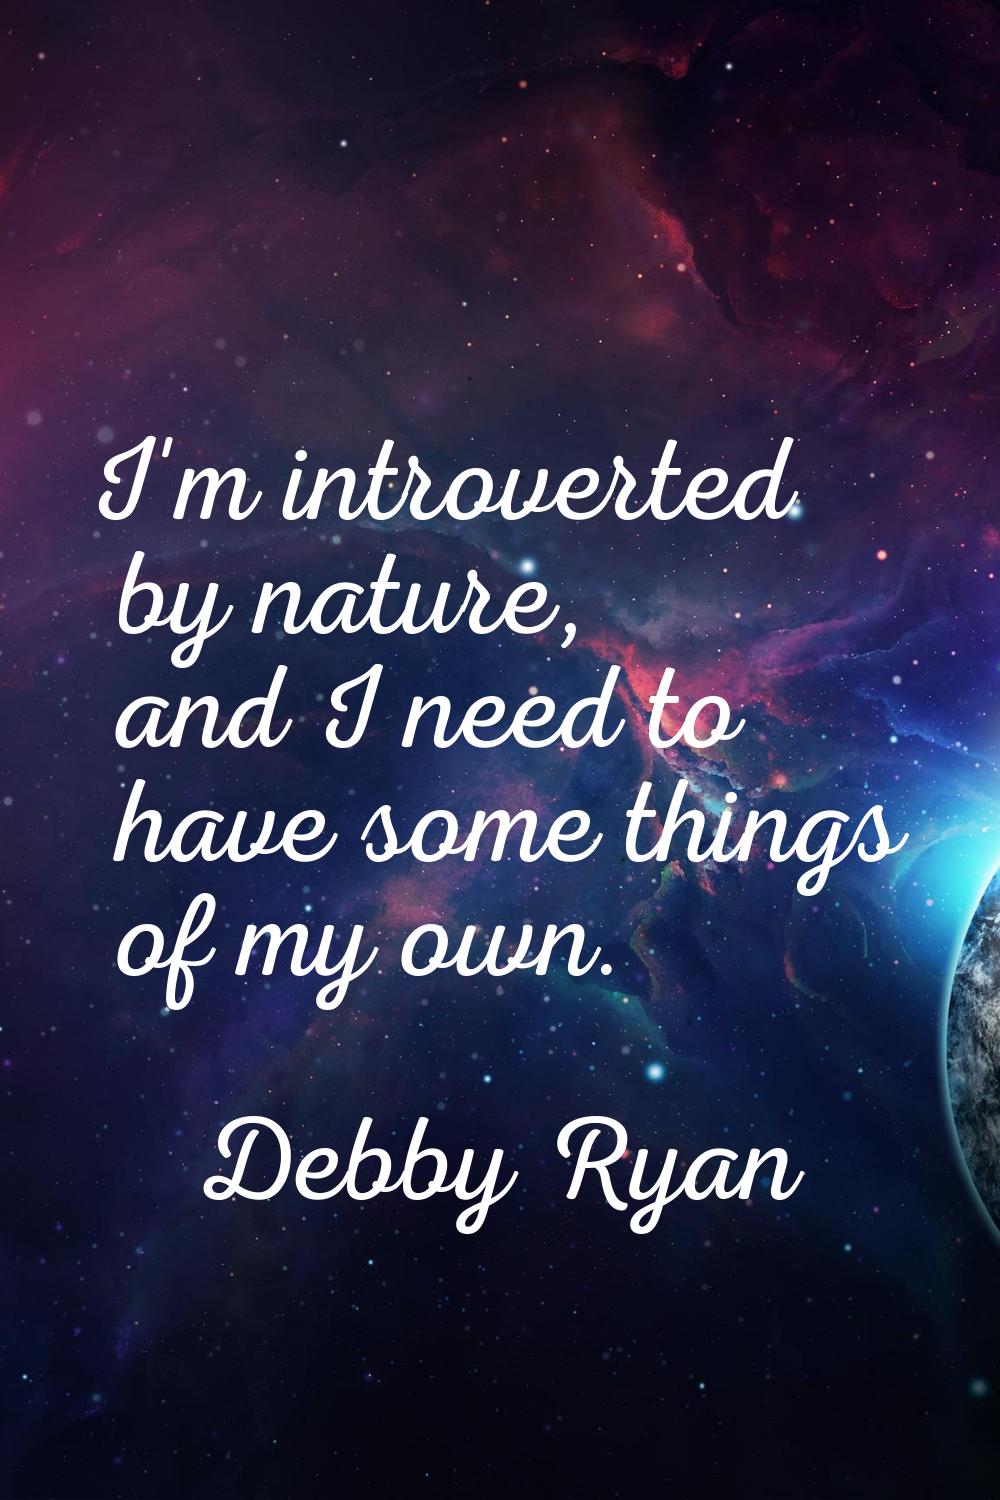 I'm introverted by nature, and I need to have some things of my own.